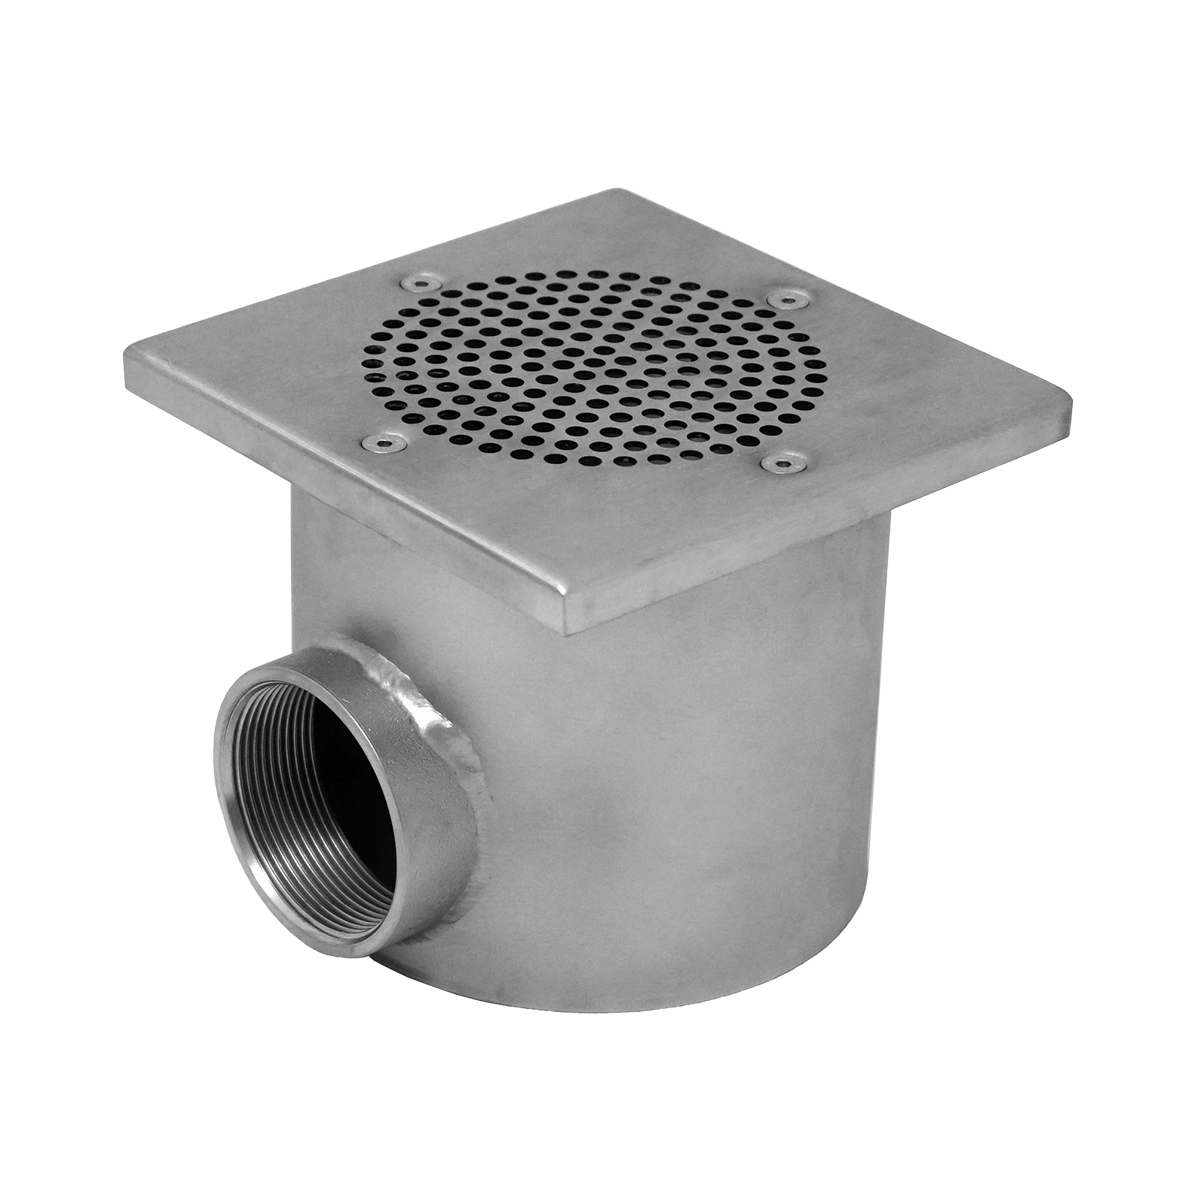 Ocean® Main Drain V4A PRO "Square" 150x150 mm, for liner, concrete- and tile pools, 2" female thread, brushed Ocean® Main Drain V4A PRO "Square" 150x150 mm, for liner, concrete- and tile pools, 2" female thread, brushed